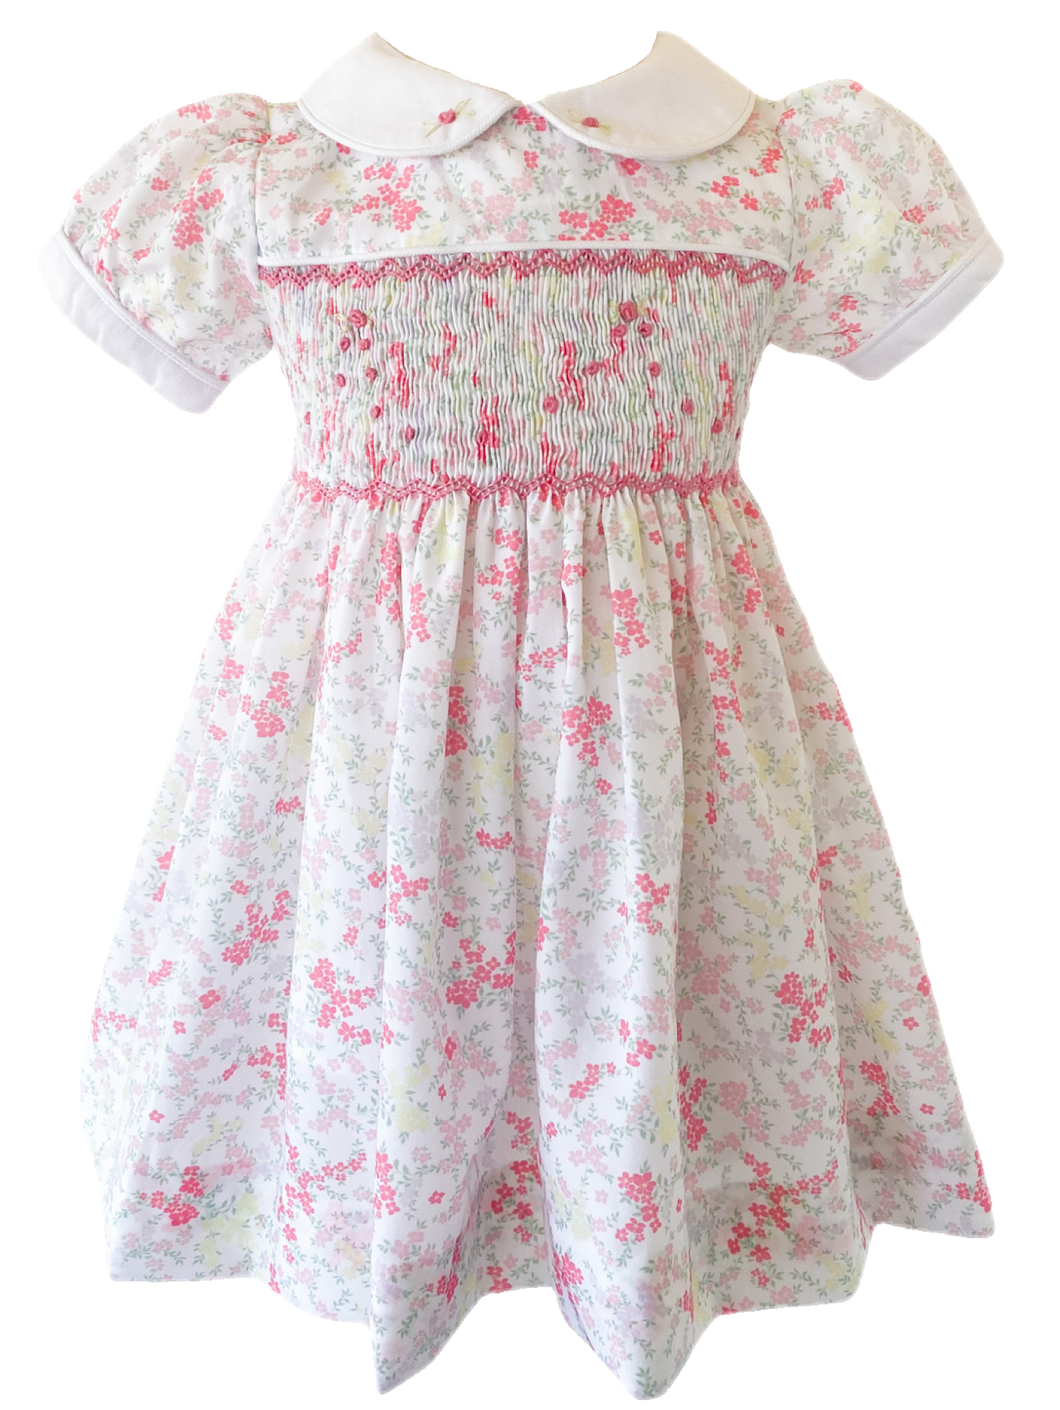 The Smocked Dress - Pastel Liberty Floral